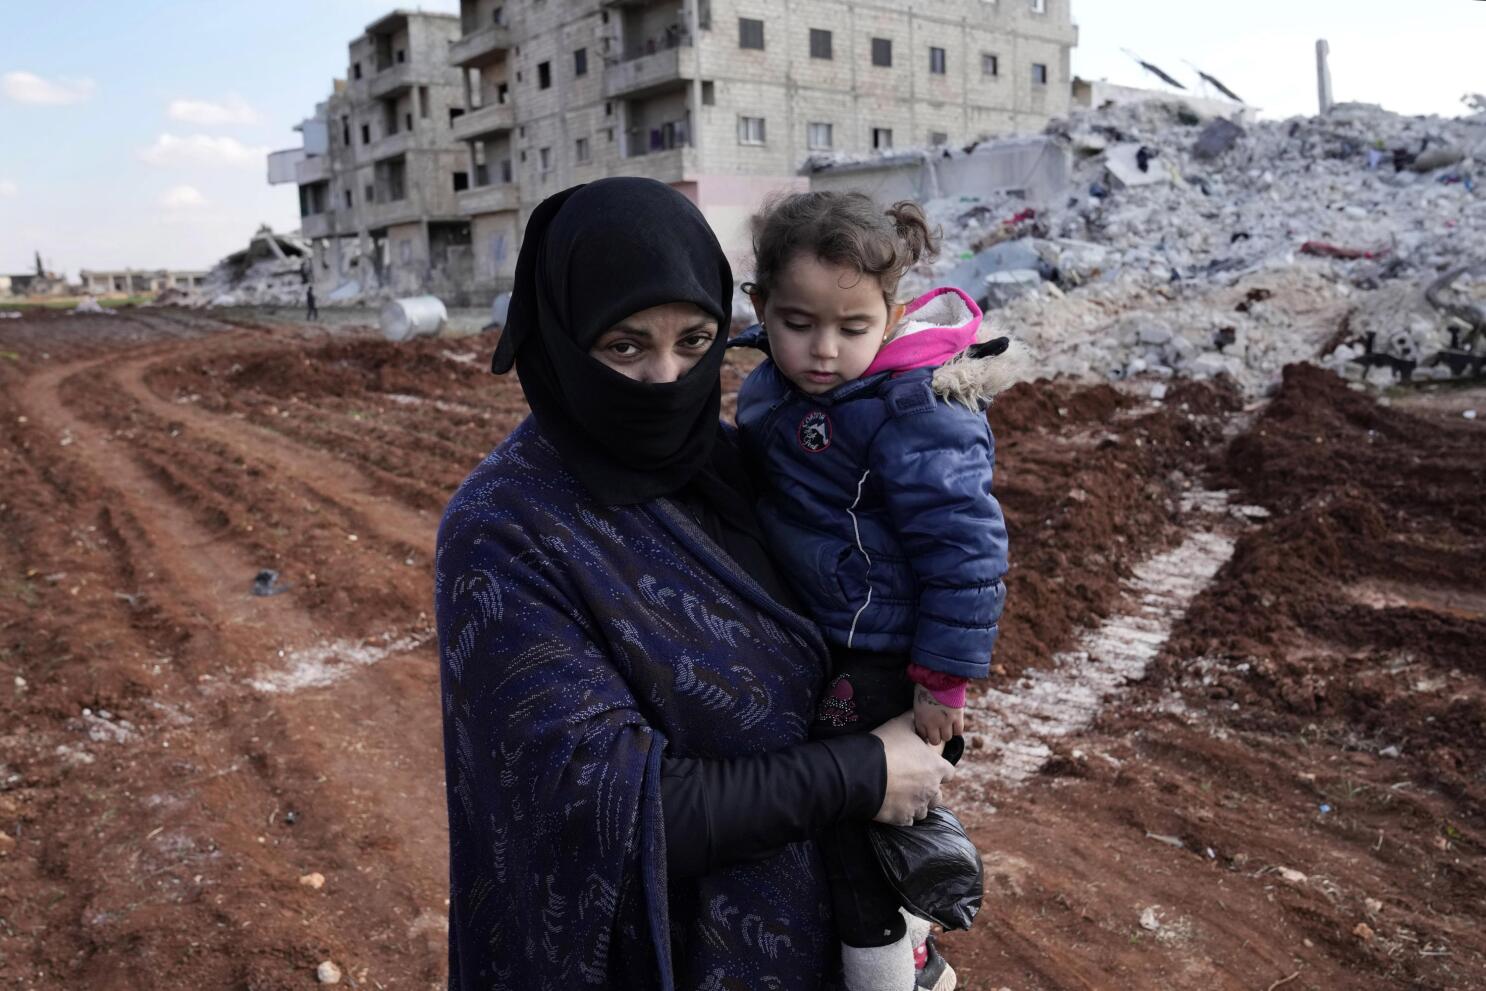 For Syrian women, quake adds disaster on top of war's pain